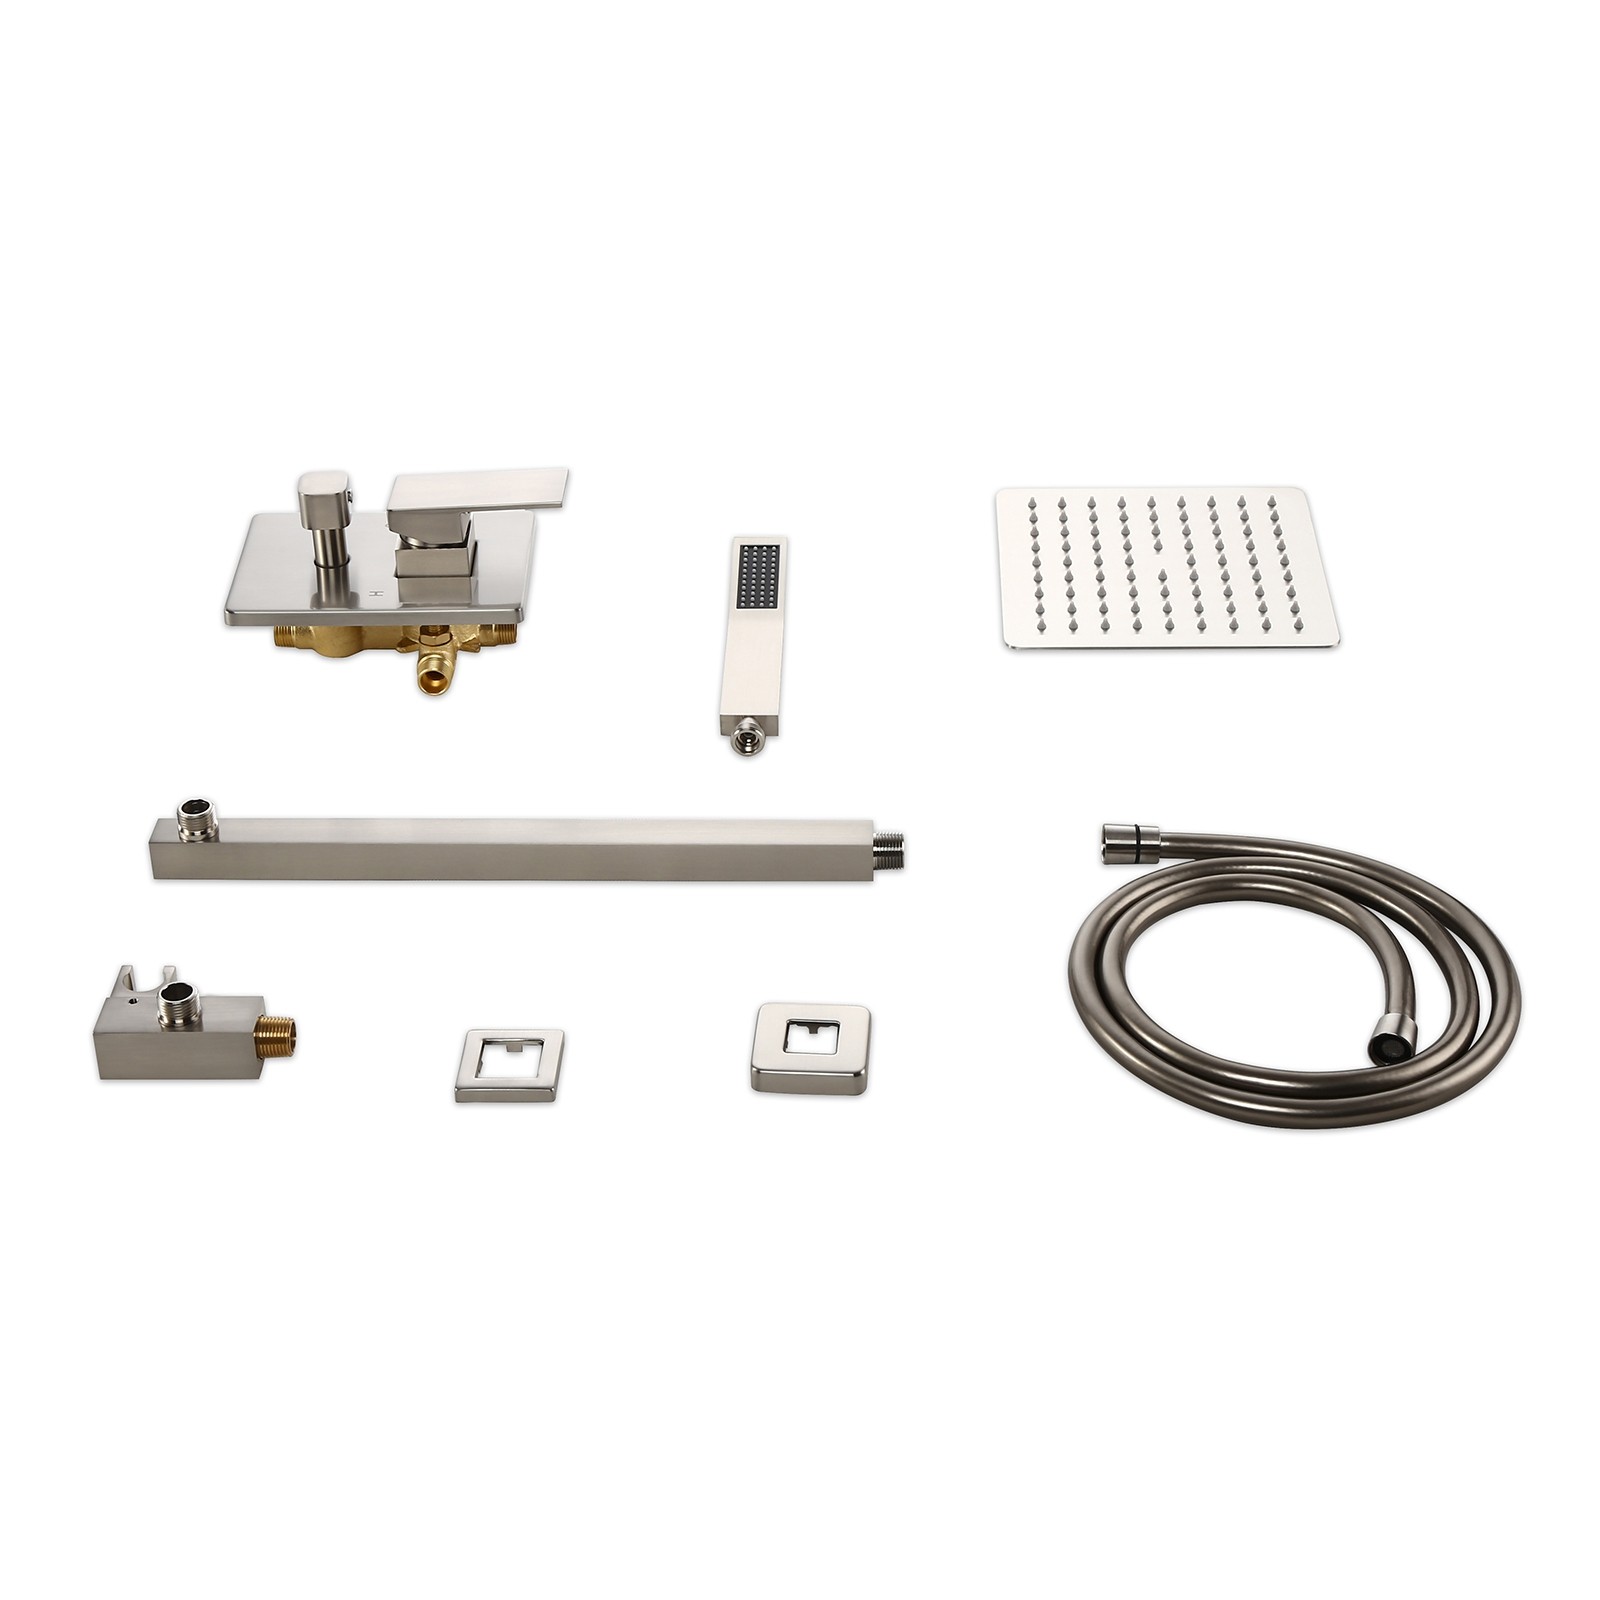 Modern 8" Wall Mounted Shower System with Handheld Shower Pressure Balance Valve